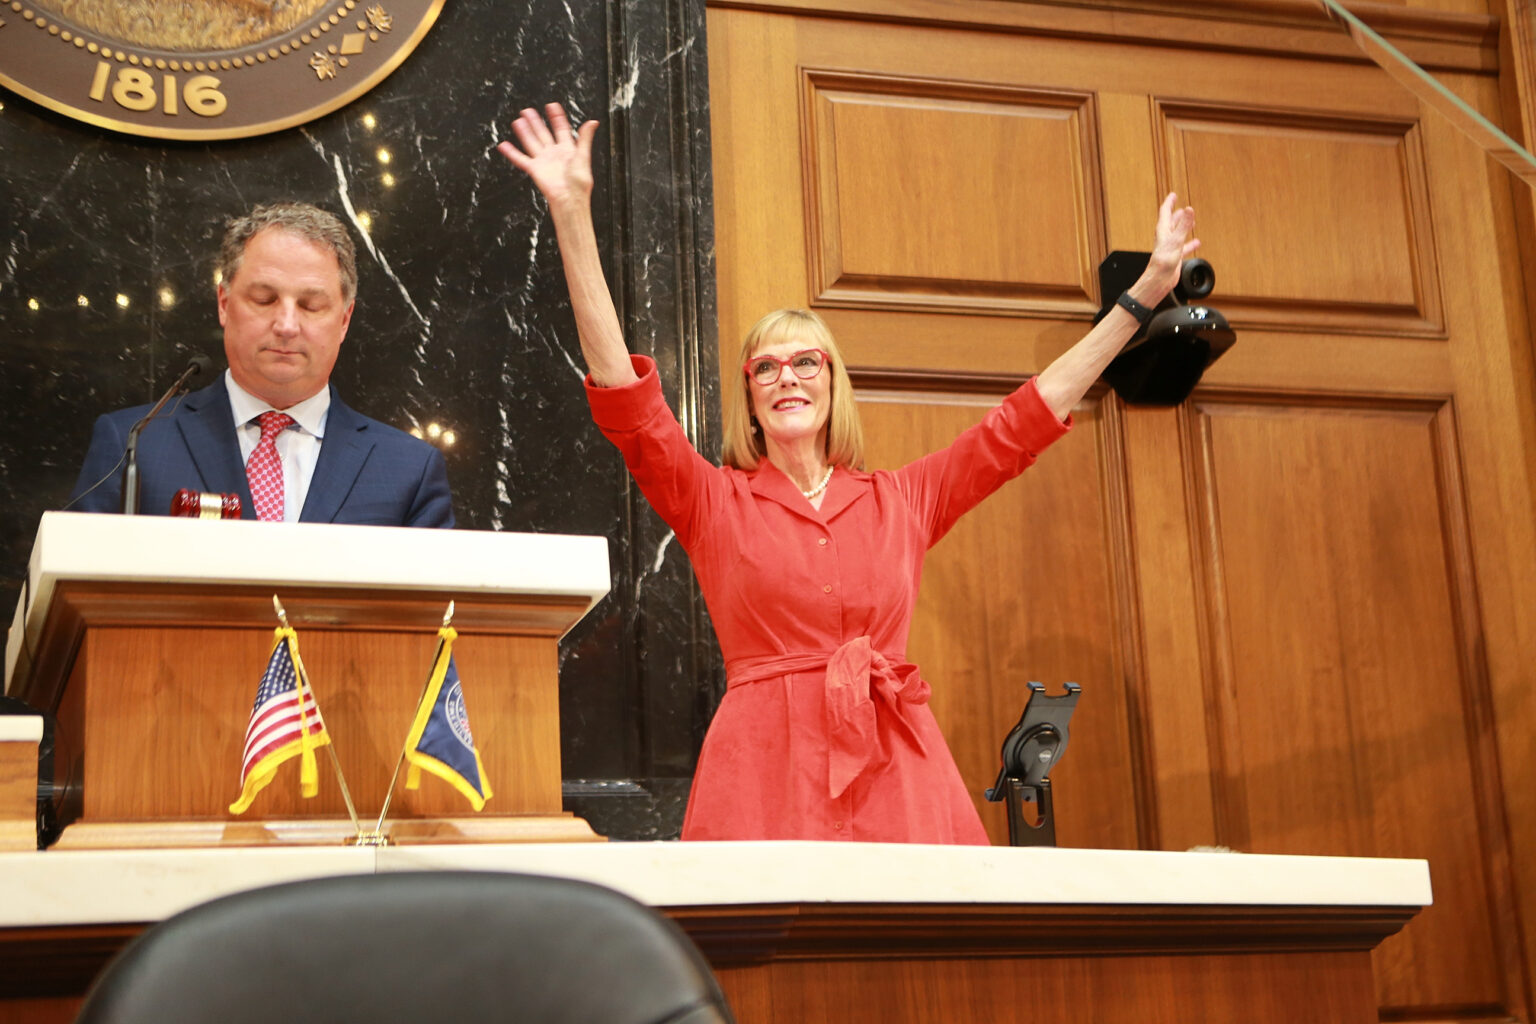 Lt. Gov. Suzanne Crouch, pictured here at the 2024 State of the State address, has spent three decades in various elected roles and is campaigning to succeed Gov. Eric Holcomb. (Monroe Bush for the Indiana Capital Chronicle)